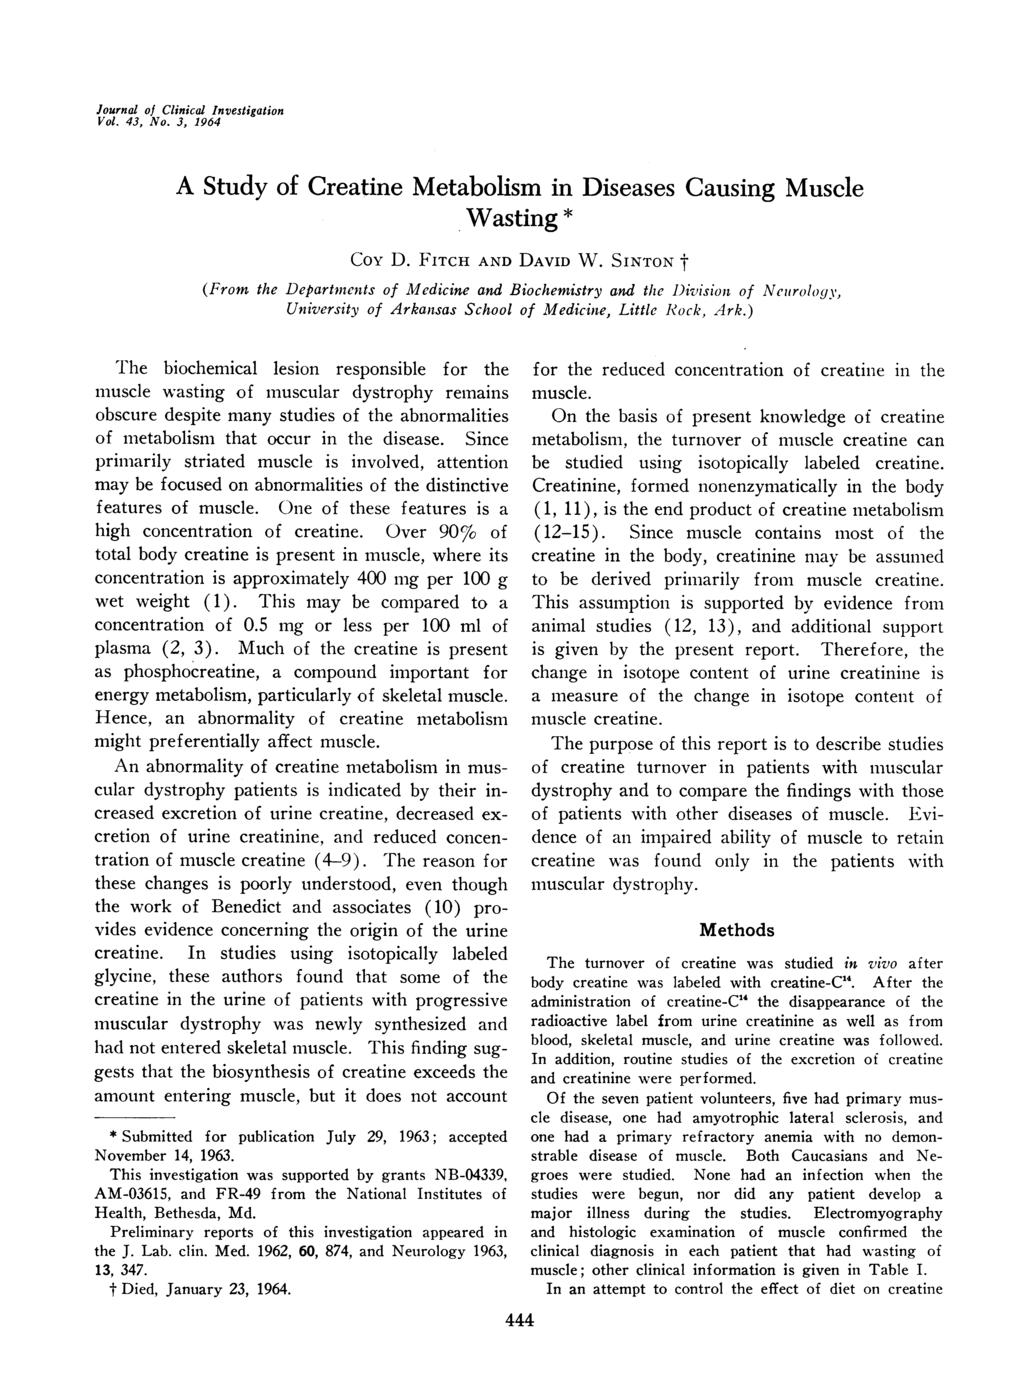 Journal of Clinical Investigation Vol. 43, No. 3, 1964 A Study of Creatine Metabolism in Diseases Causing Muscle Wasting * Coy D. FITCH AND DAVID W.